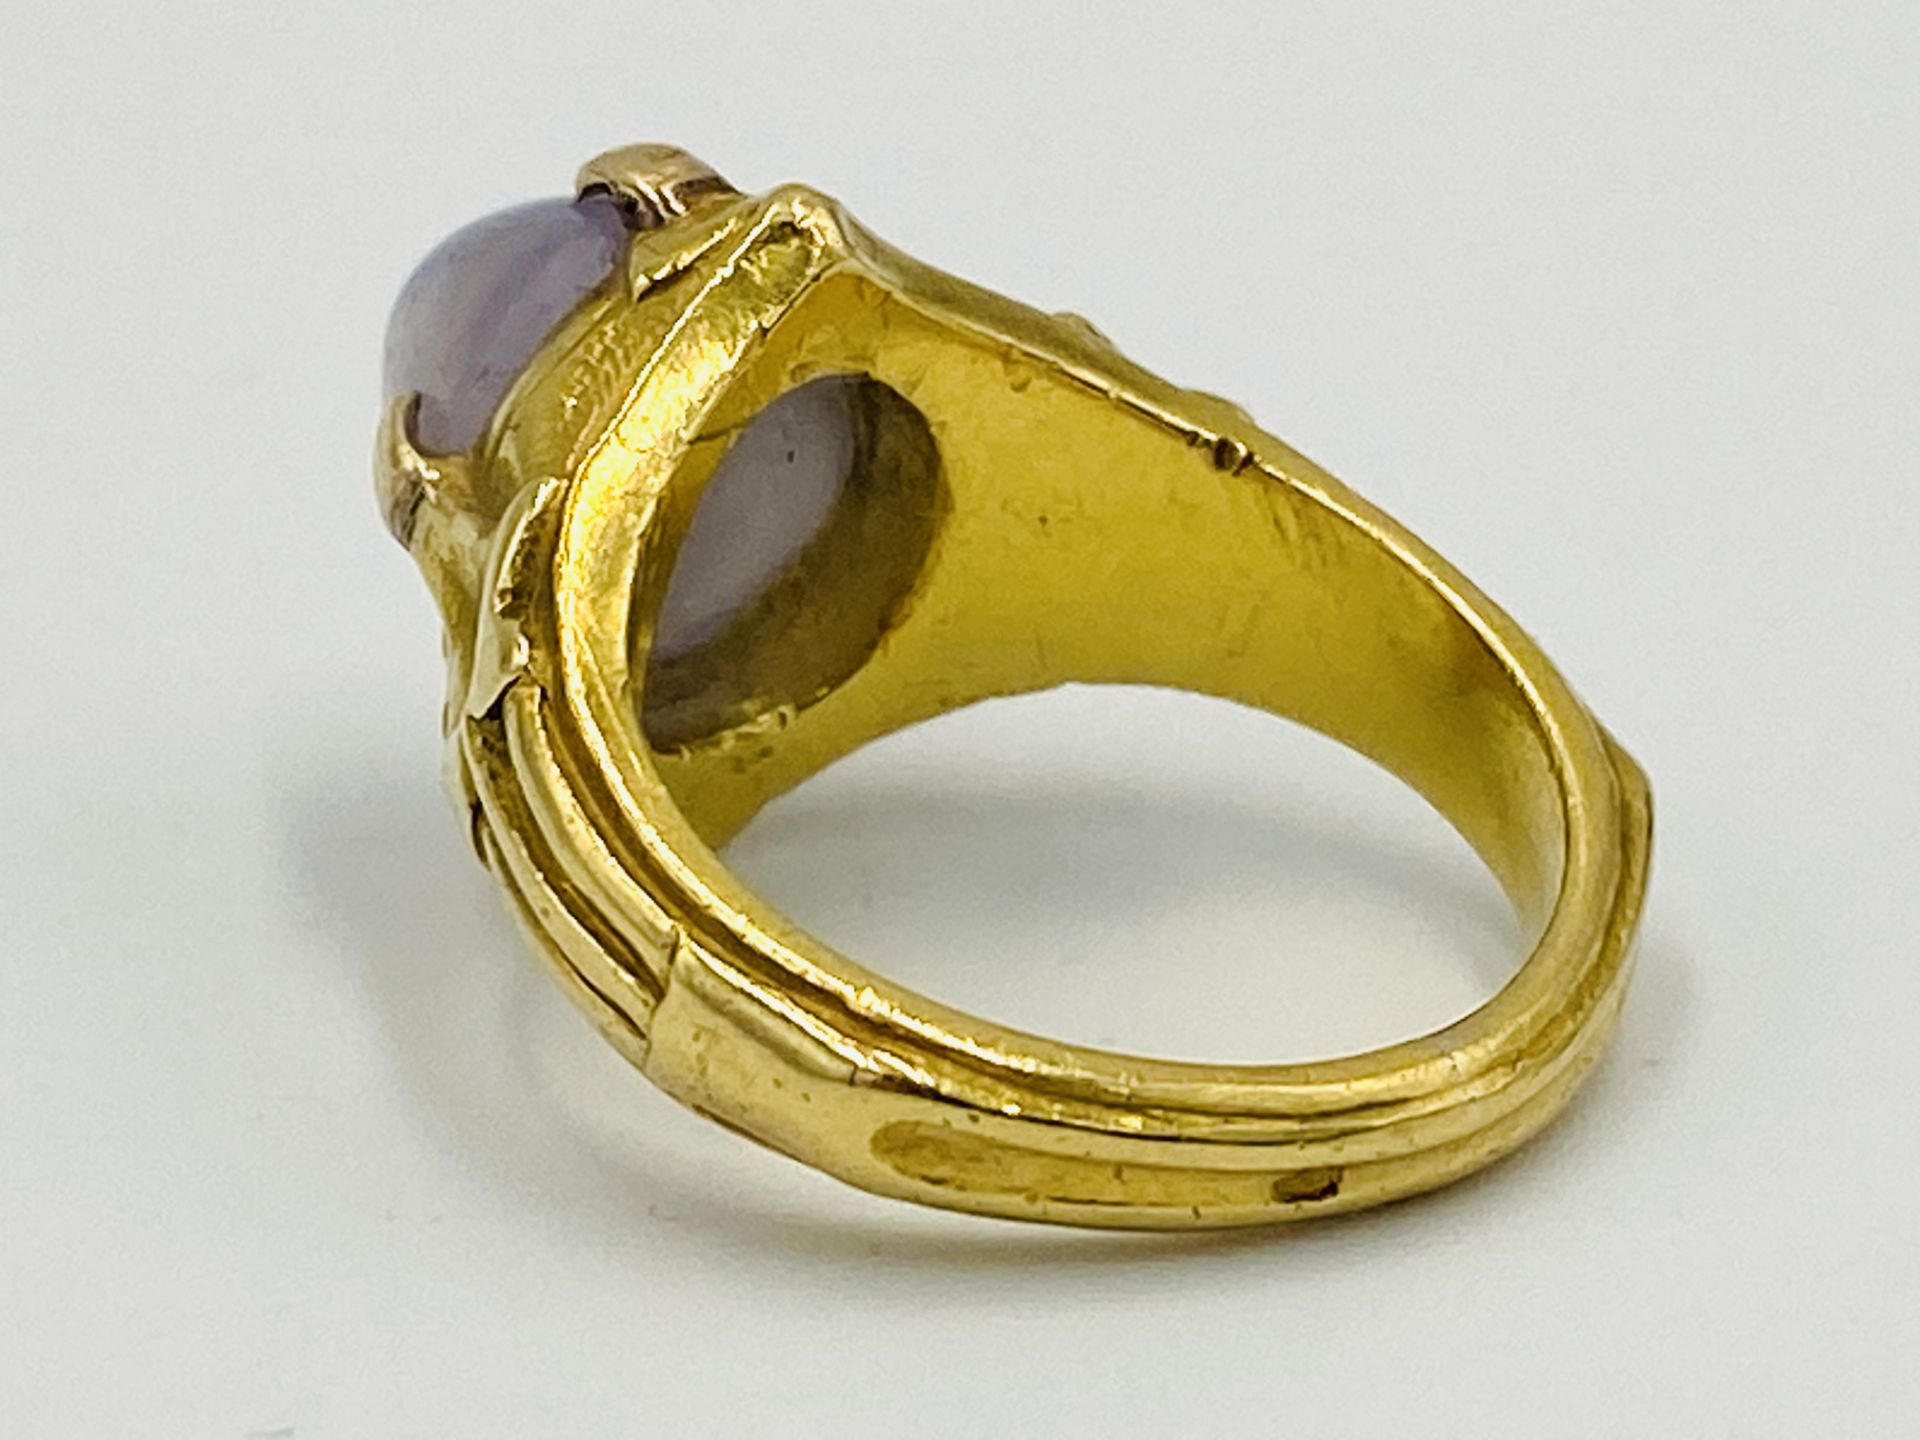 French gold star sapphire ring - Image 4 of 4